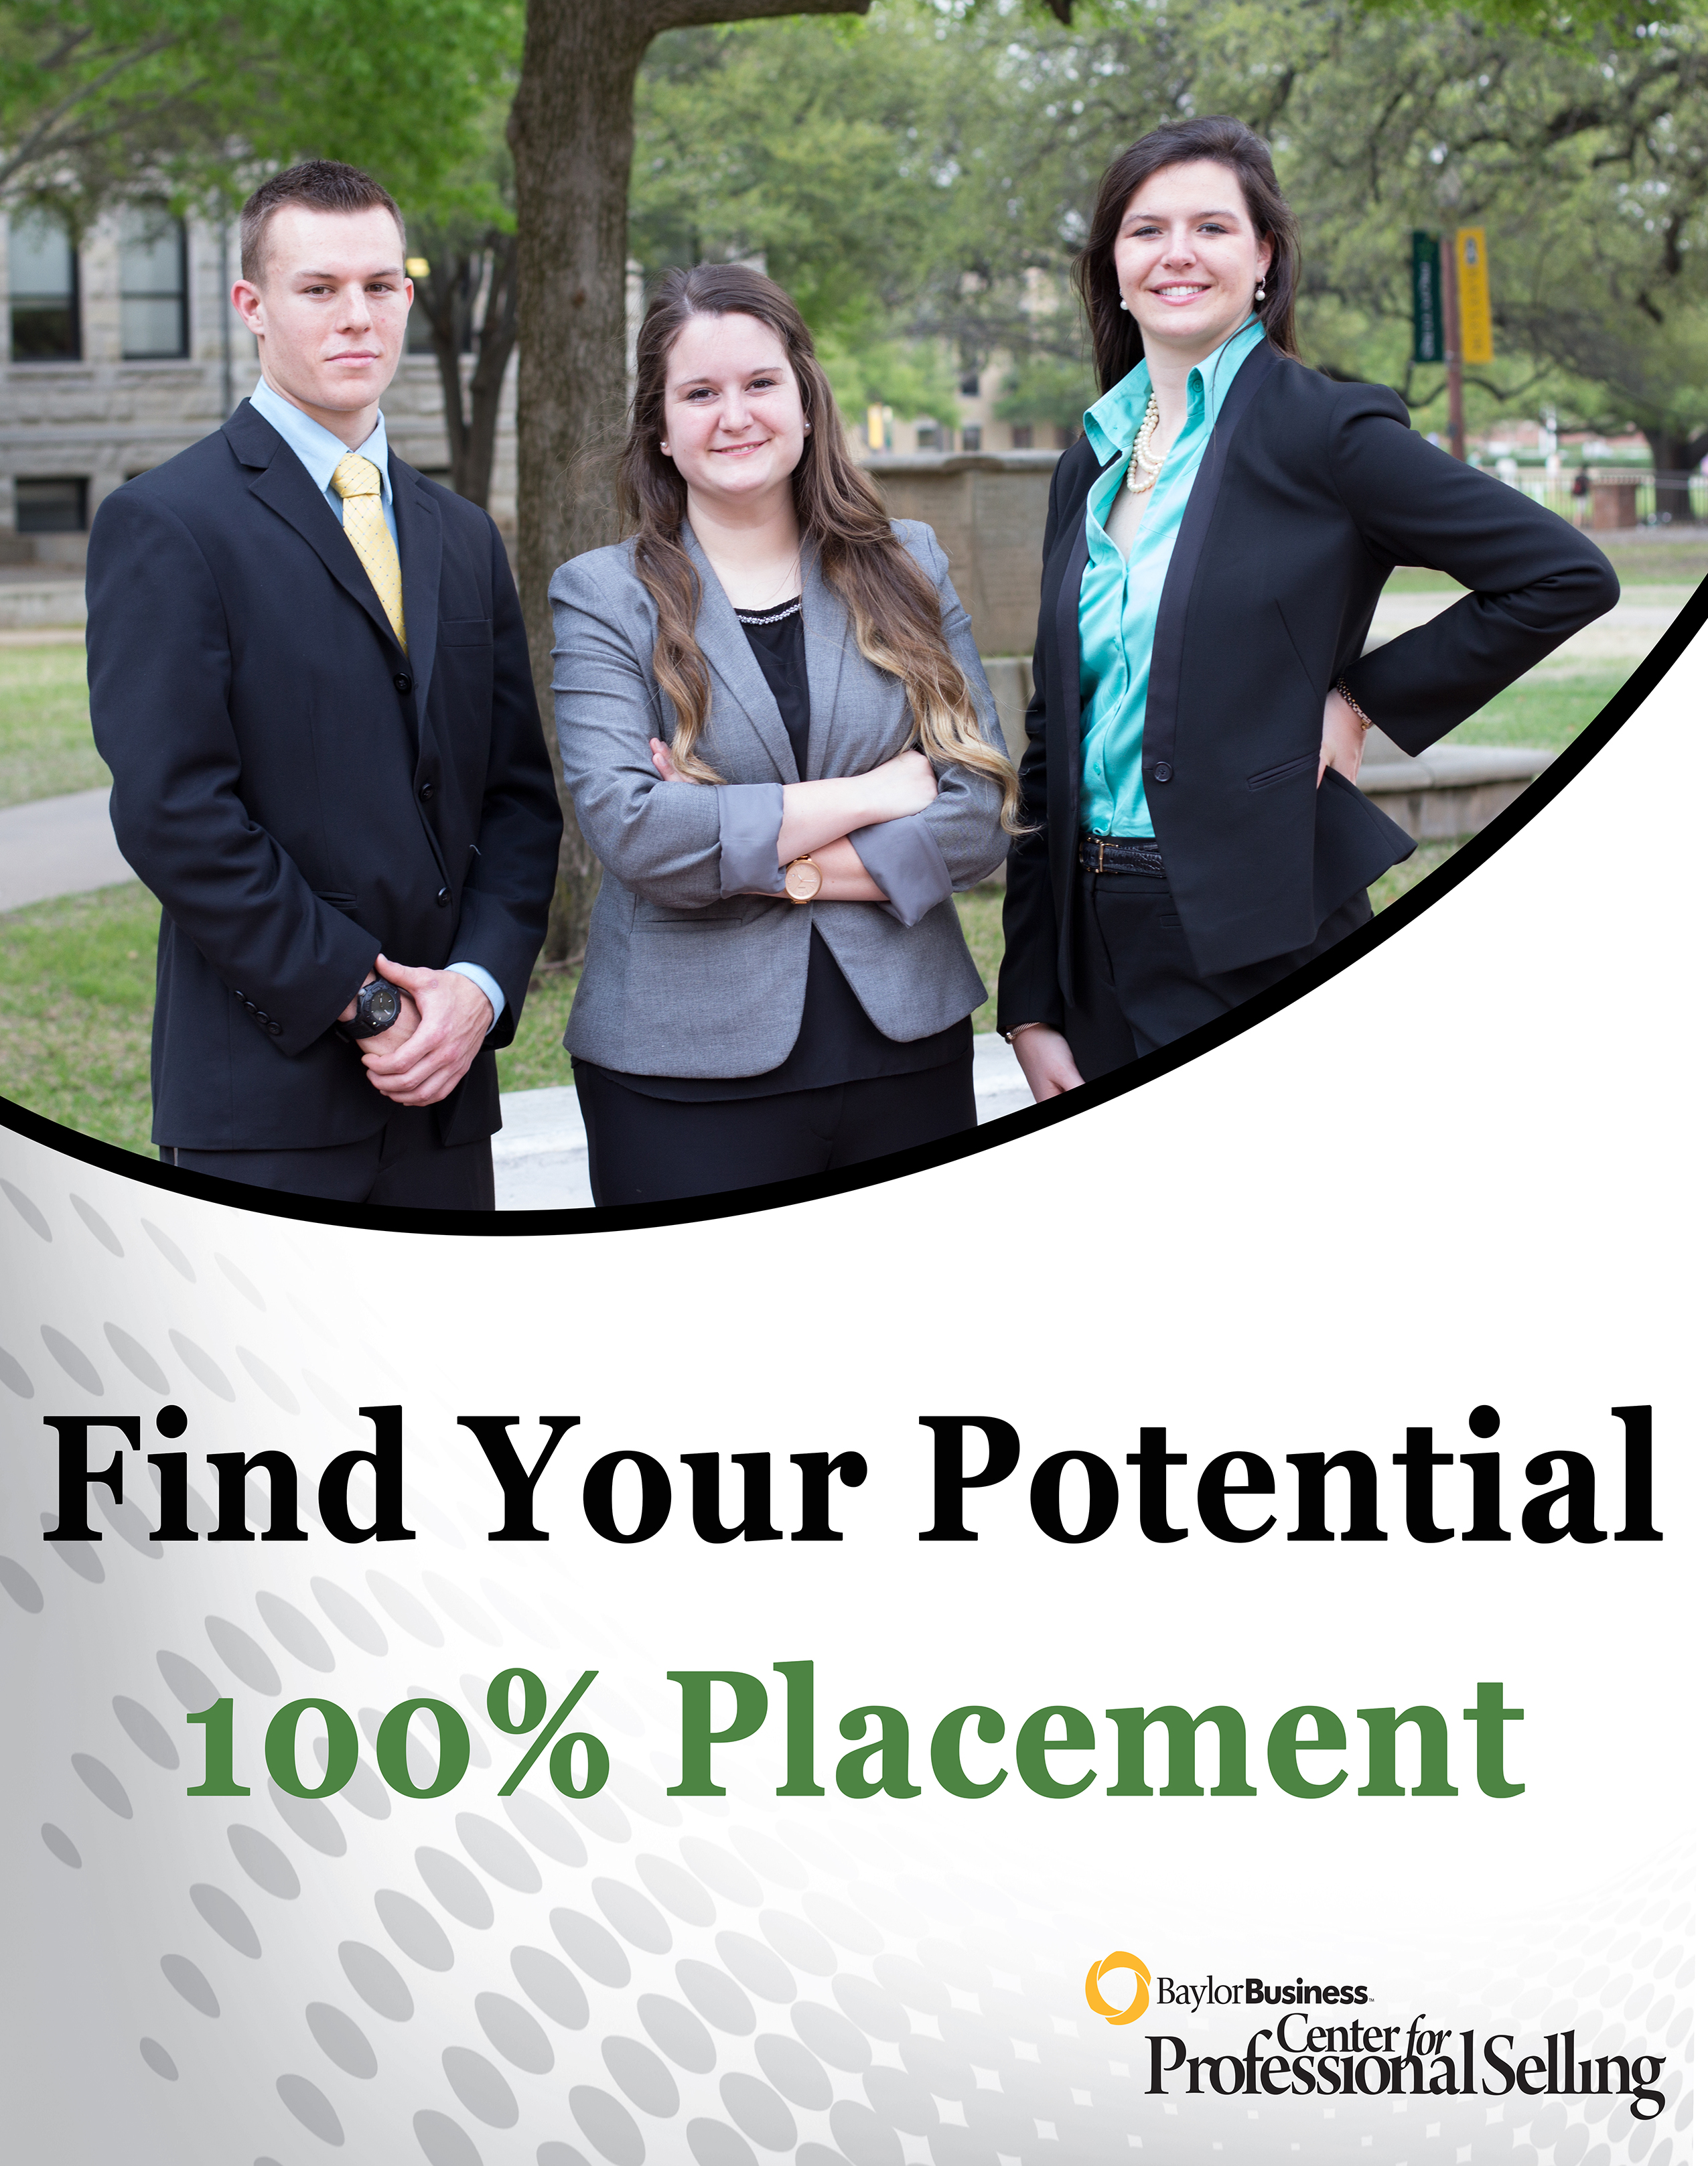 Find Your Potential 100% Placement Ad 1